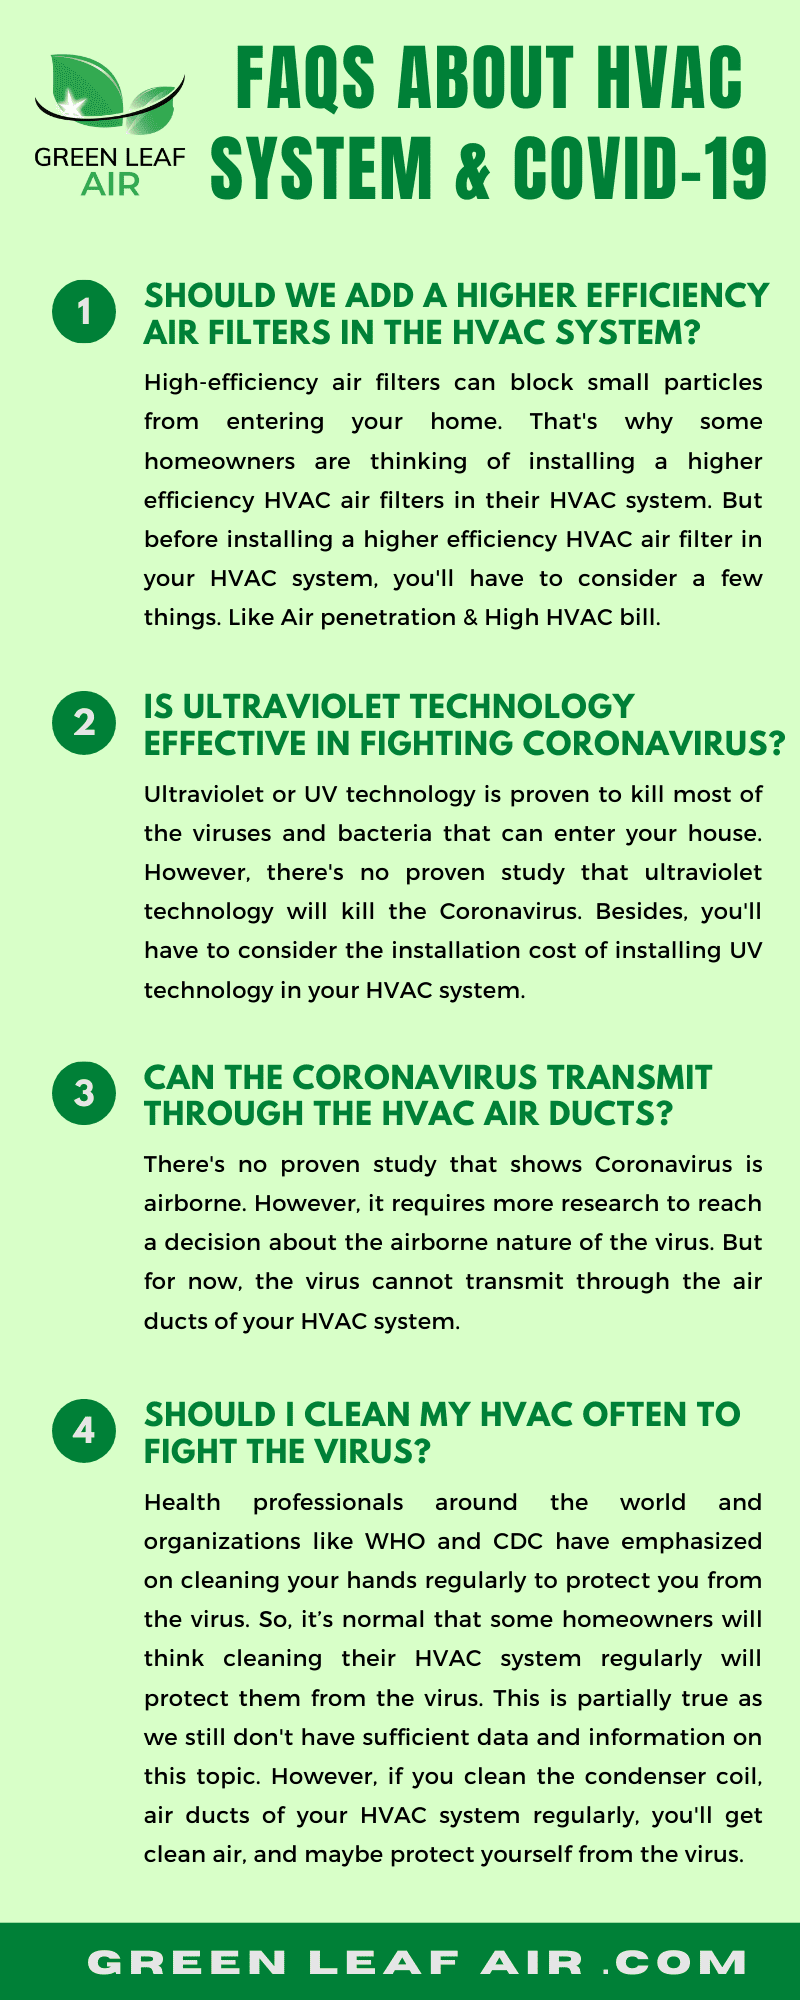 FAQs About HVAC System & COVID-19